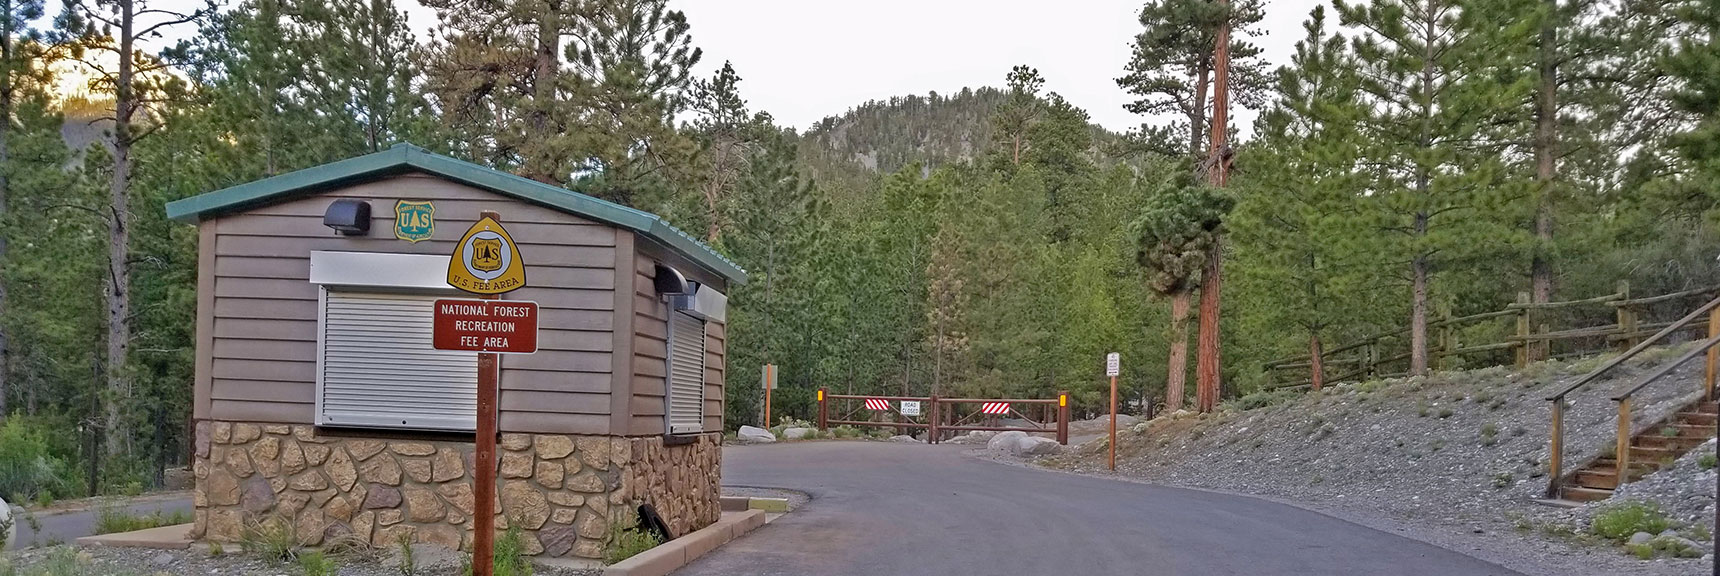 Entering the Old Mill Picnic Area. Gates Locked at 6:30am Mid-June | The Sisters South | Lee Canyon | Mt Charleston Wilderness | Spring Mountains, Nevada